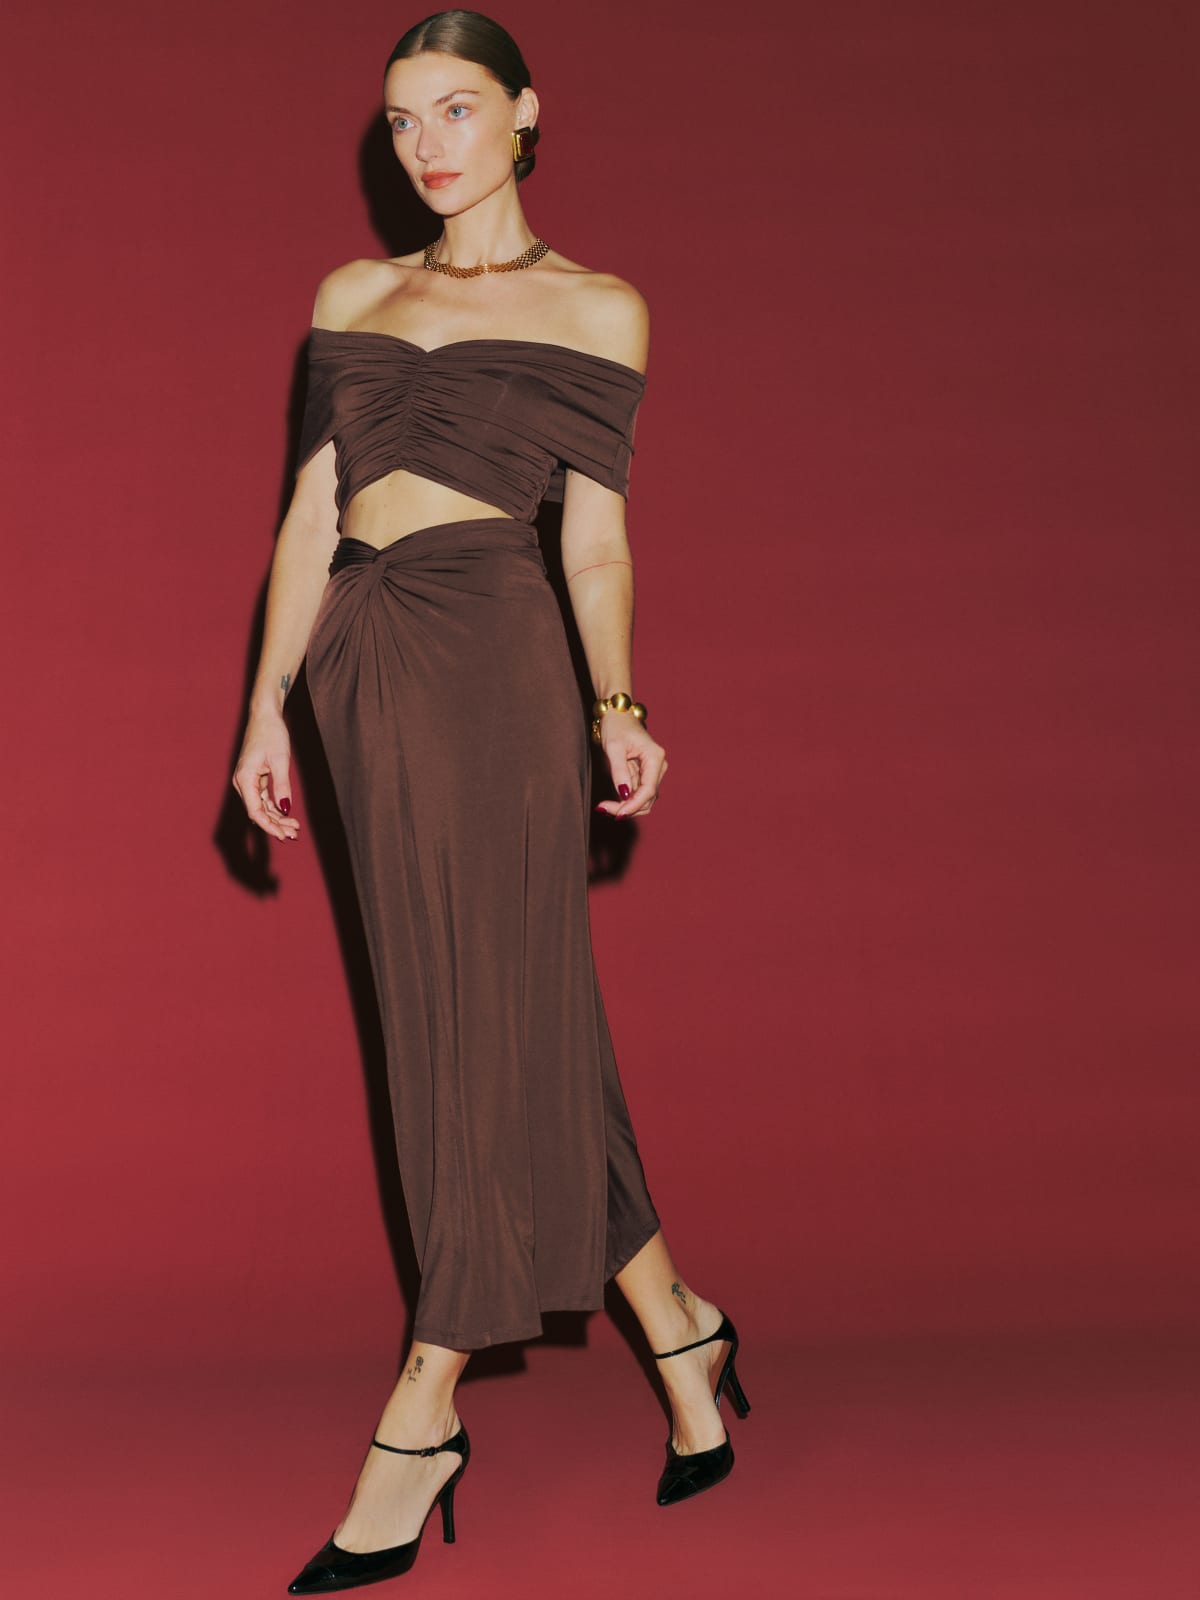 Reformation Atwood set is a slim fitting set with a cropped top, and features off the shoulder, ruched, short sleeves. The bottom is a bodycon, midi skirt with center front ruching details.